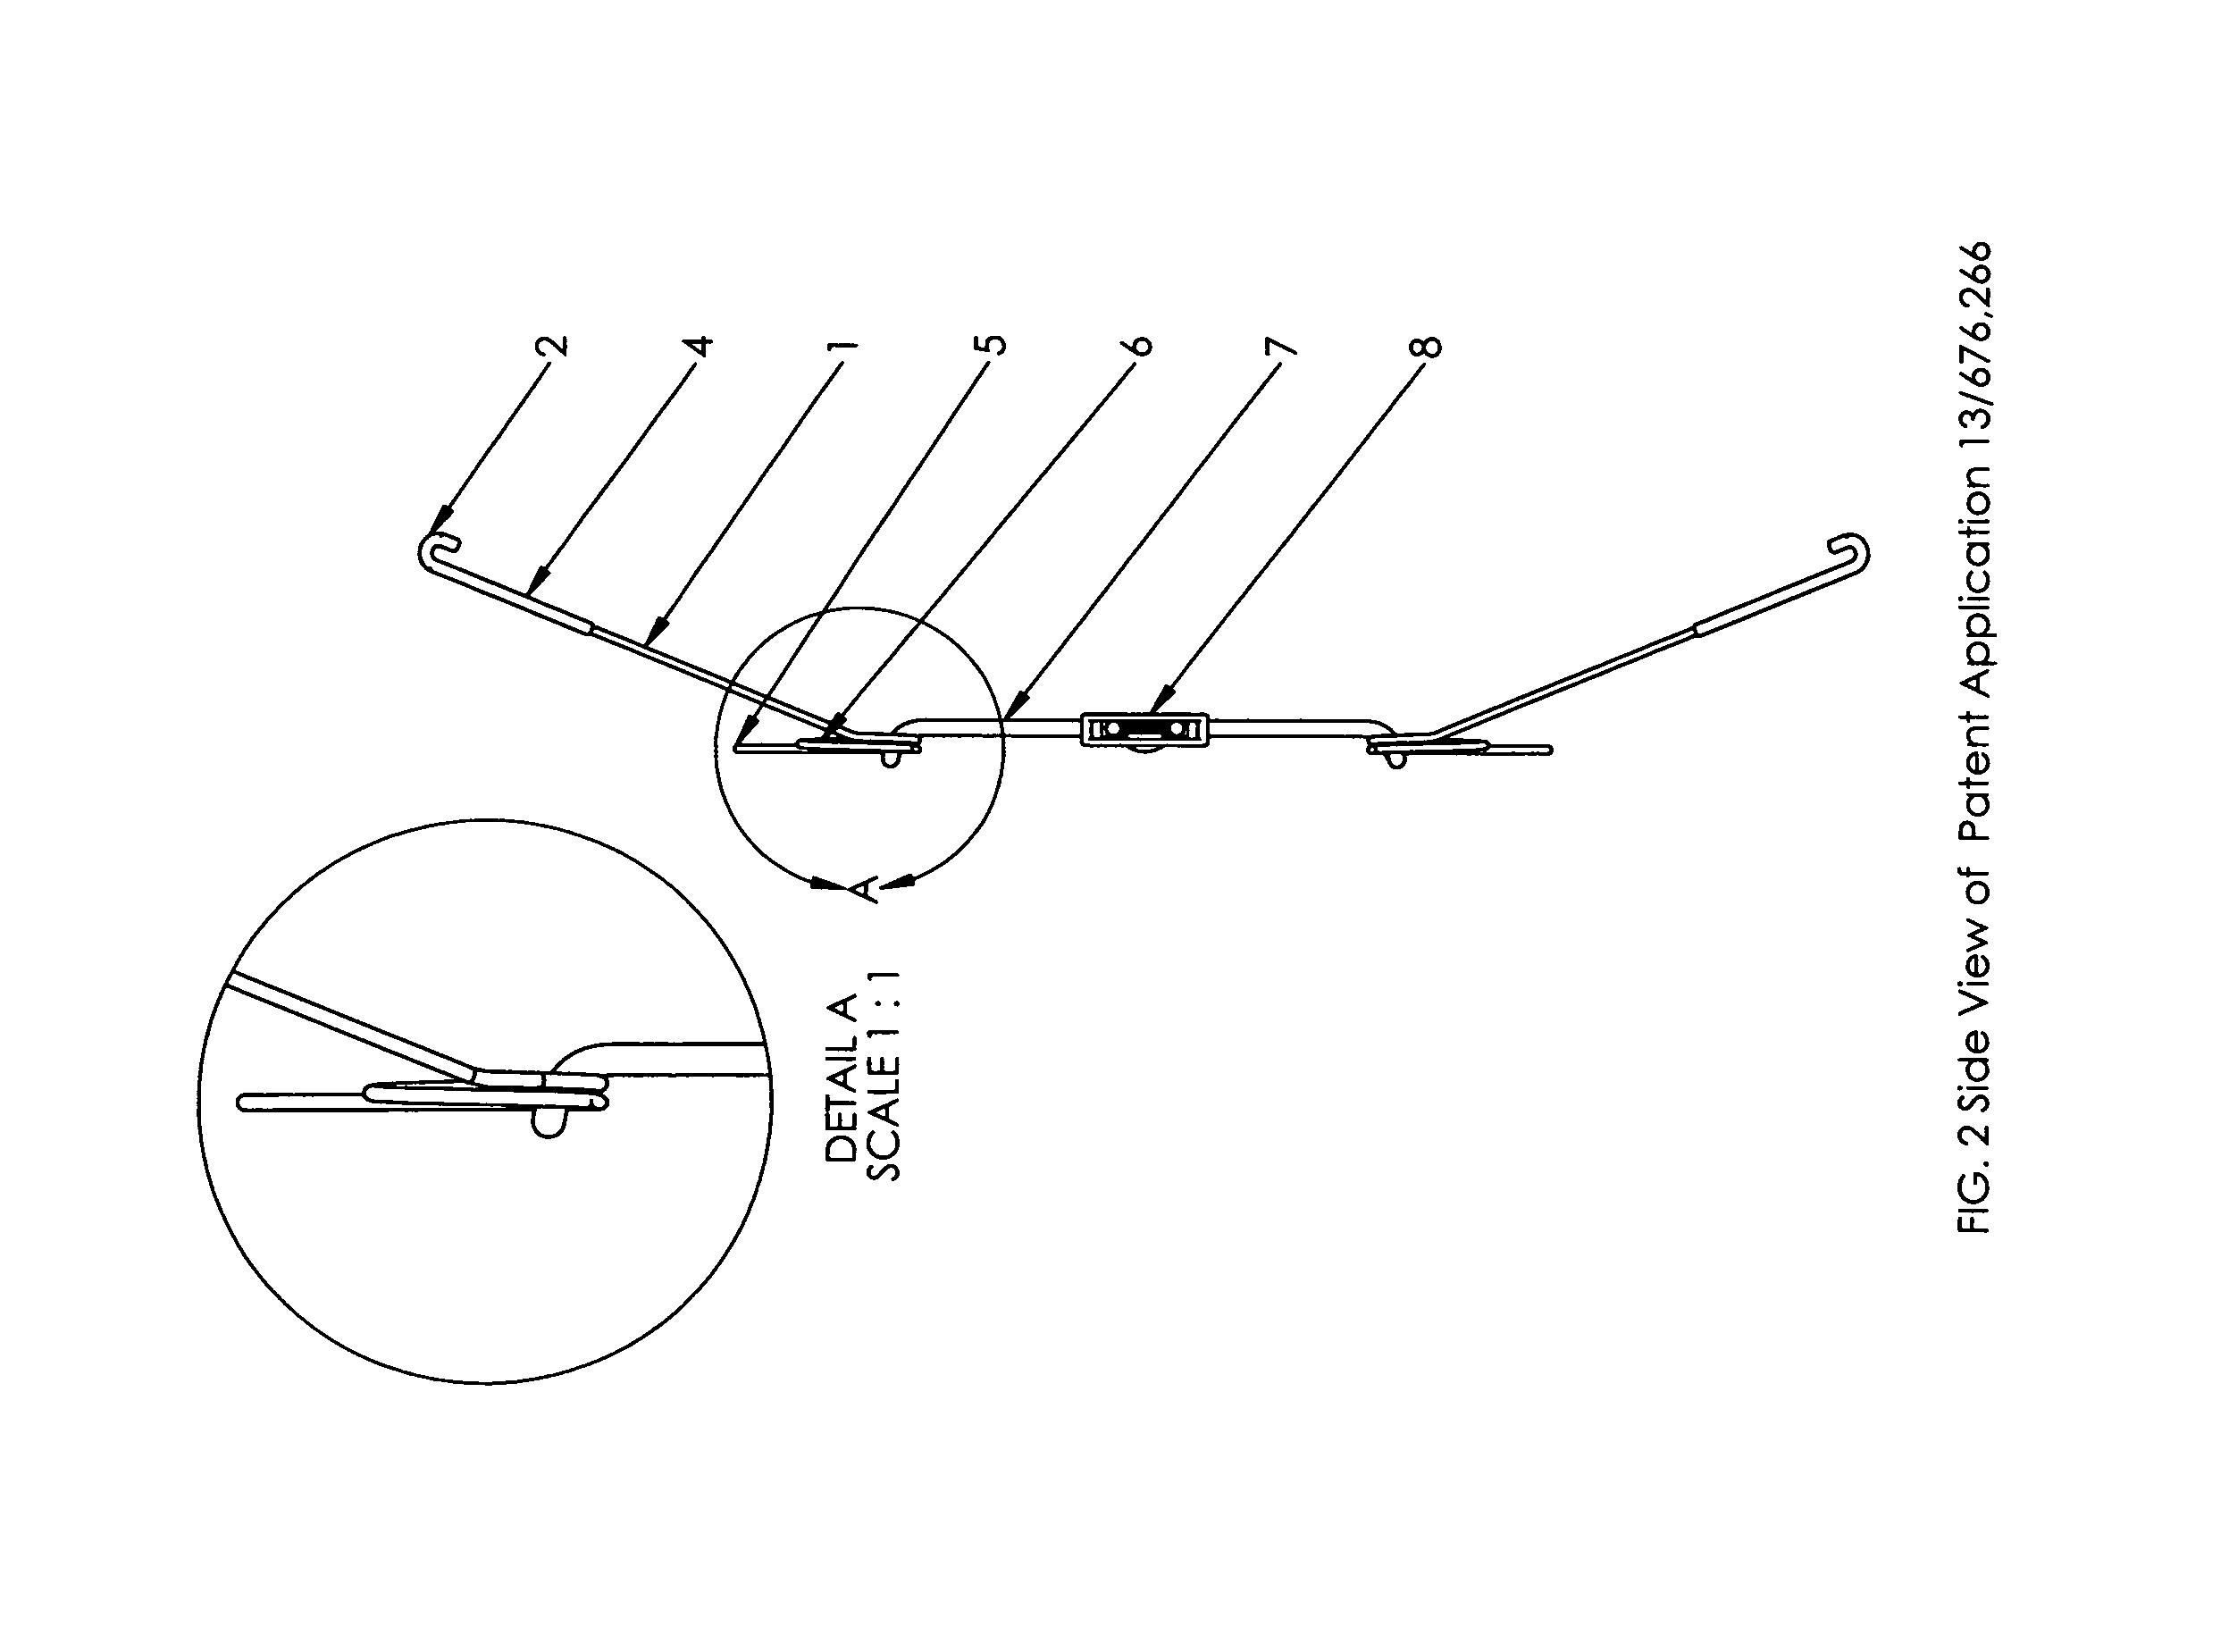 Hanger for mounting objects of various shapes and sizes